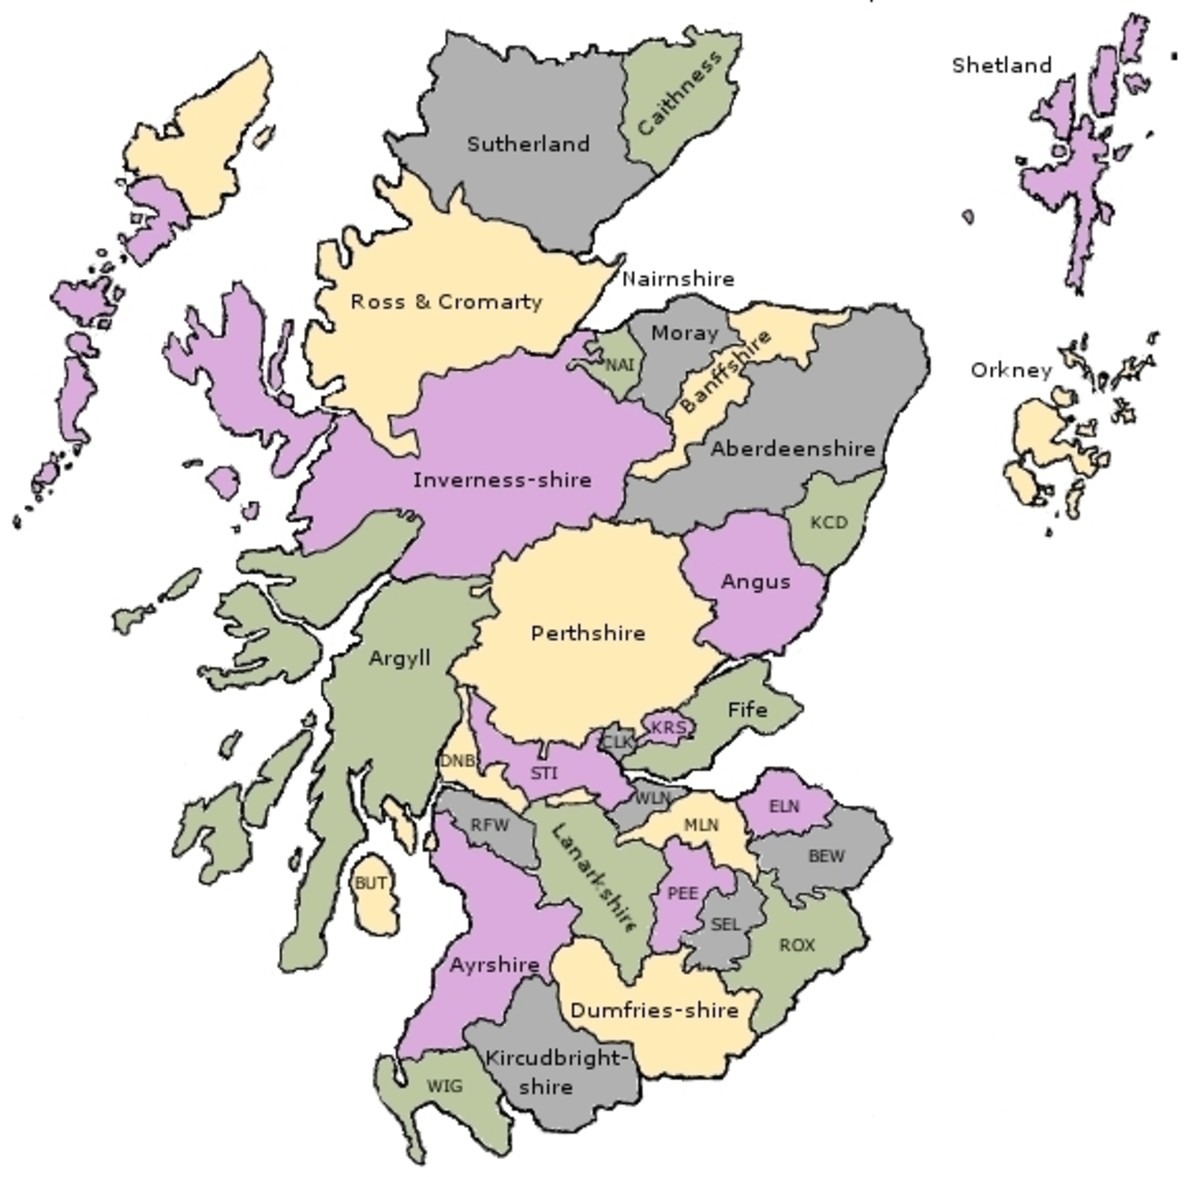 A map showing the historical counties of Scotland first established in 1284.